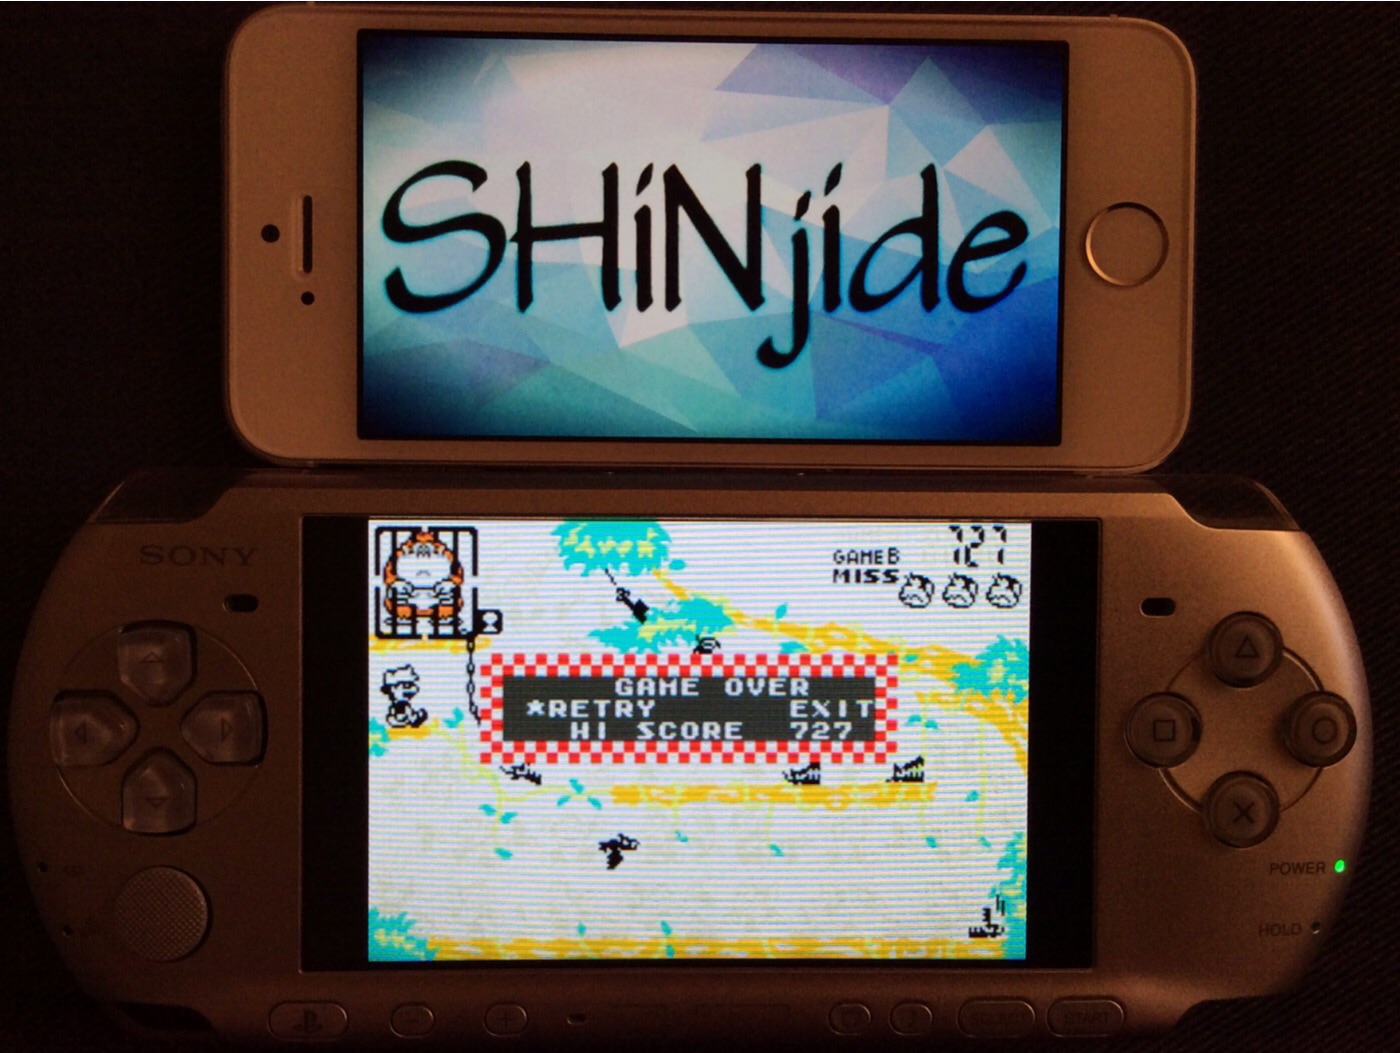 SHiNjide: Game & Watch Gallery 4: Donkey Kong Jr. [Classic: Hard] (GBA Emulated) 727 points on 2014-09-26 10:24:43